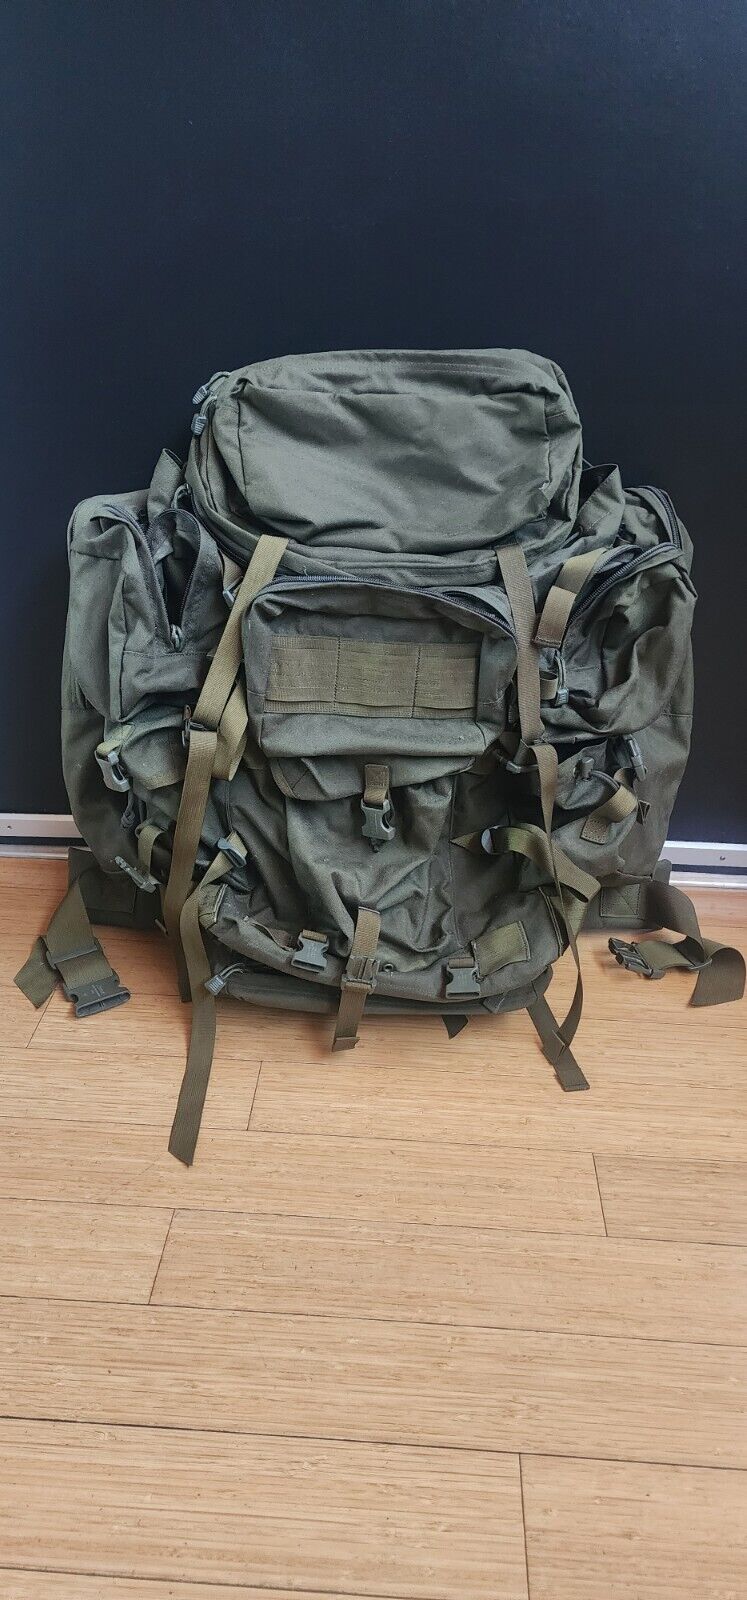 Ruck Sack Blackhawk Tactical SOF Large ALICE Pack w/Frame Straps  Green Military